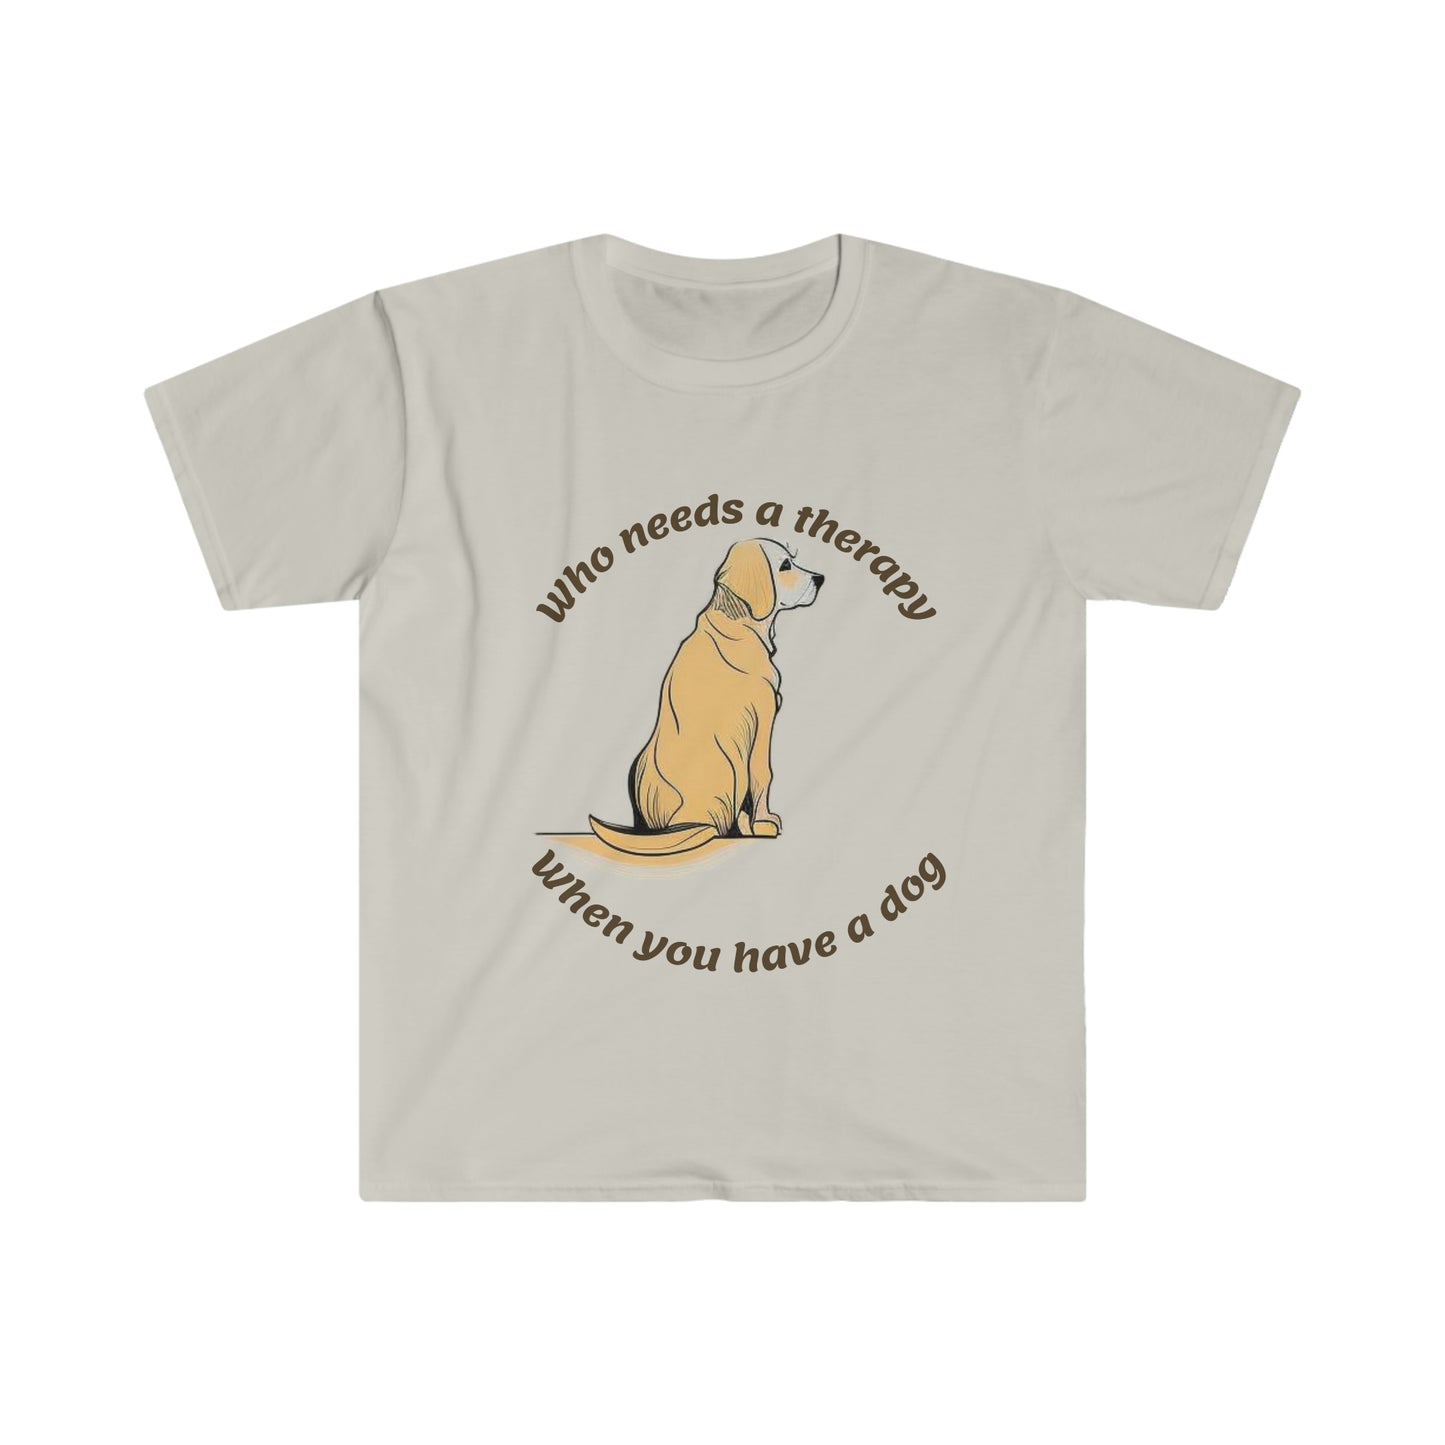 "Who Needs A Therapy When You Have A Dog" Essential Comfort Tee